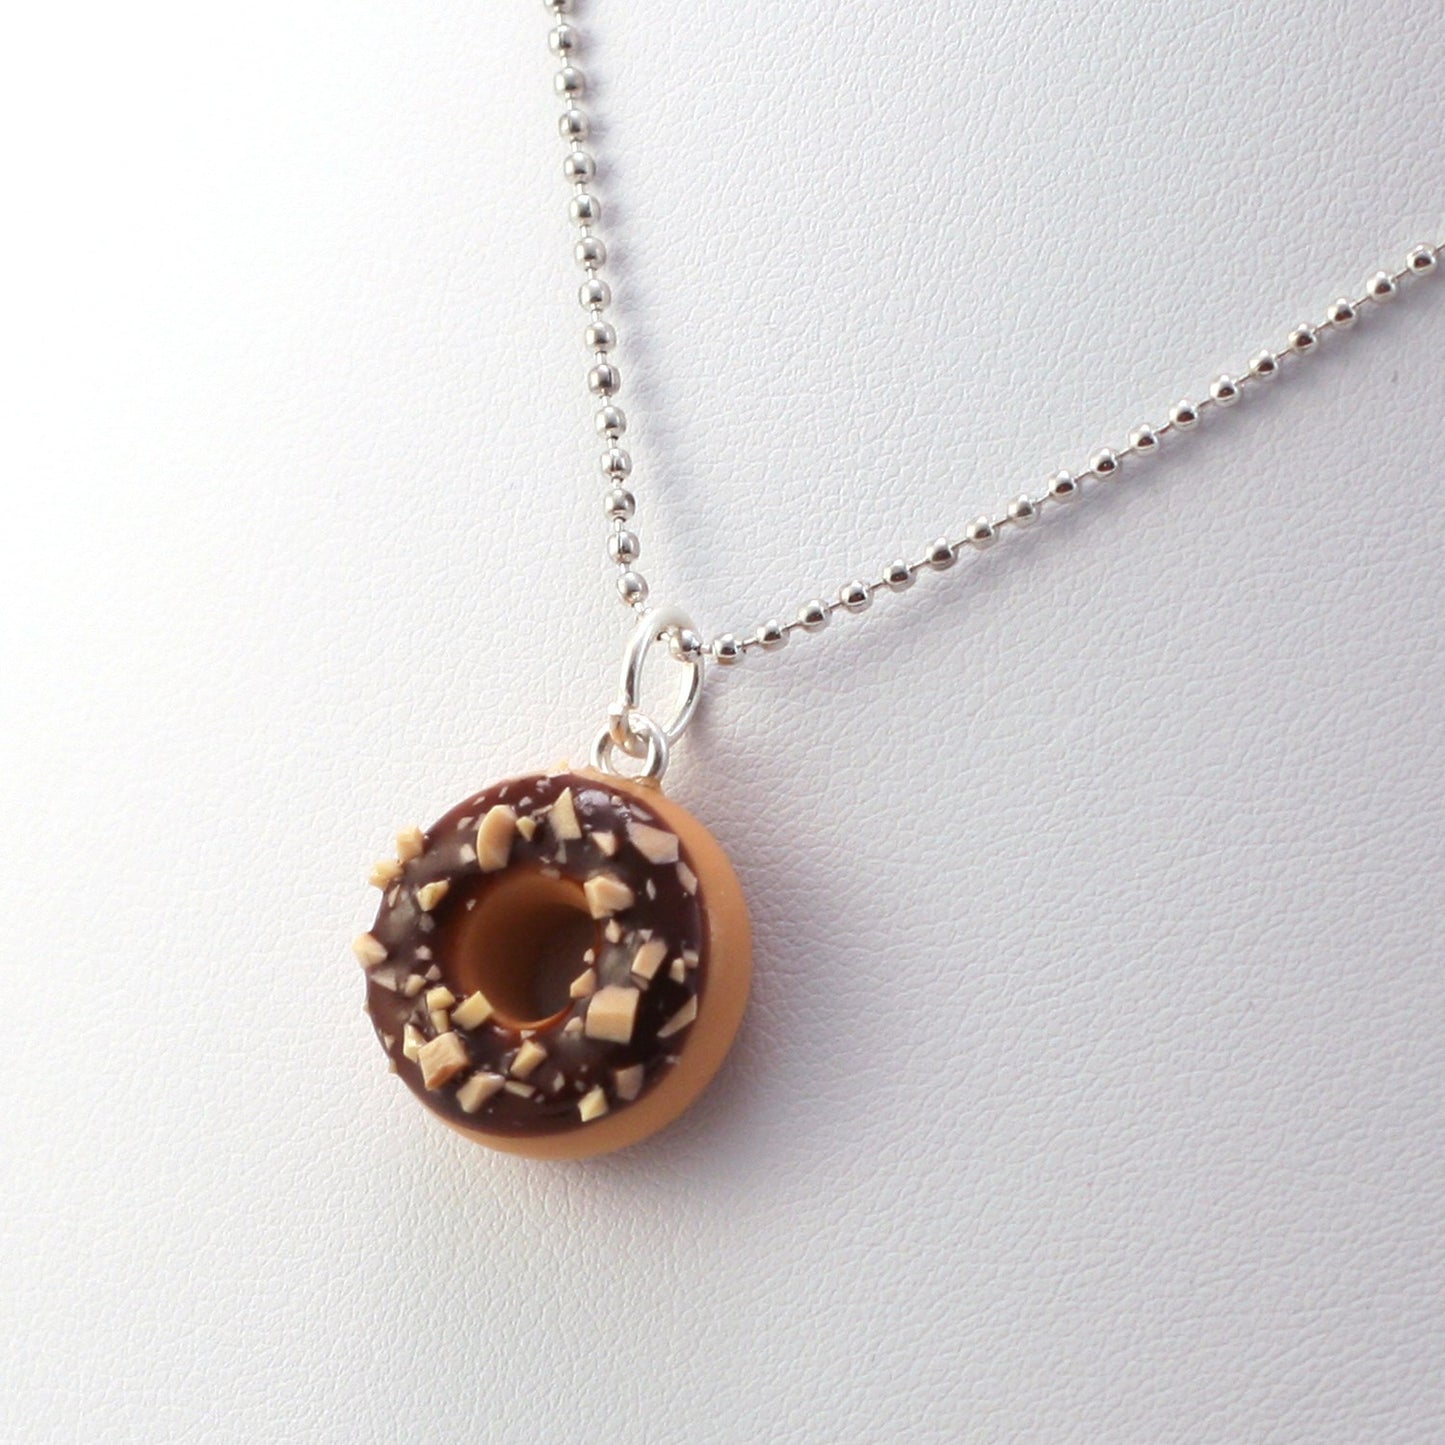 Scented Chocolate Nut Donut Necklace - Tiny Hands
 - 4